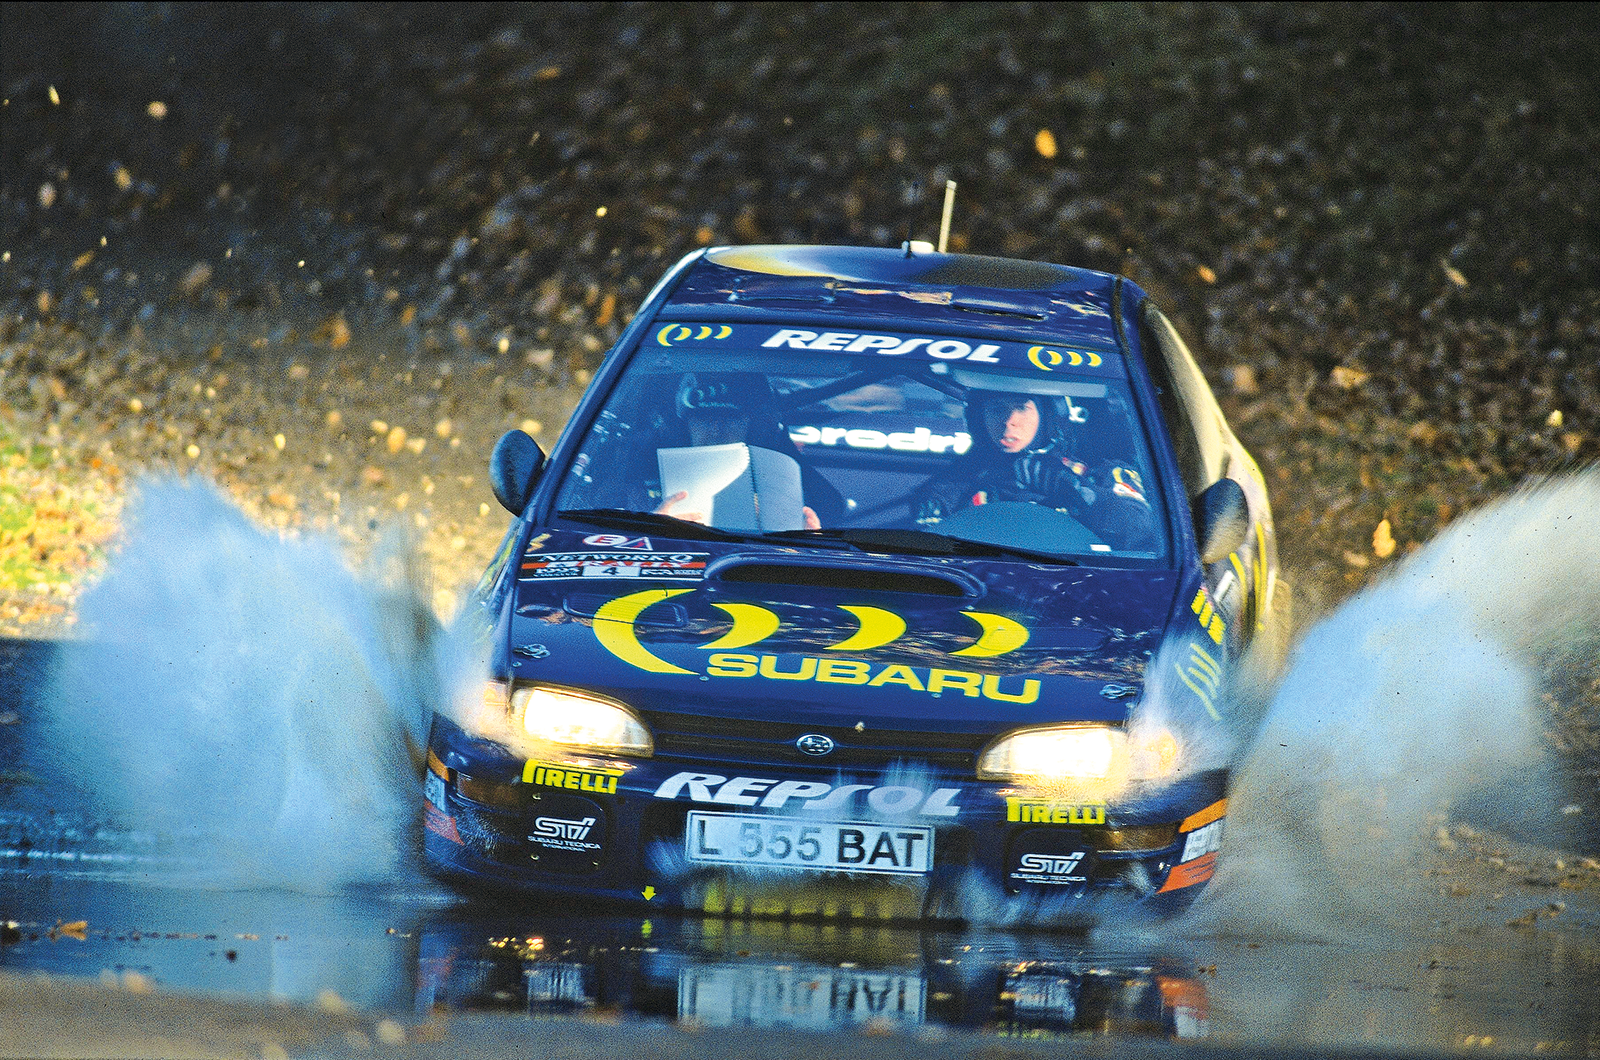 Classic & Sports Car – Colin McRae: the people’s champion